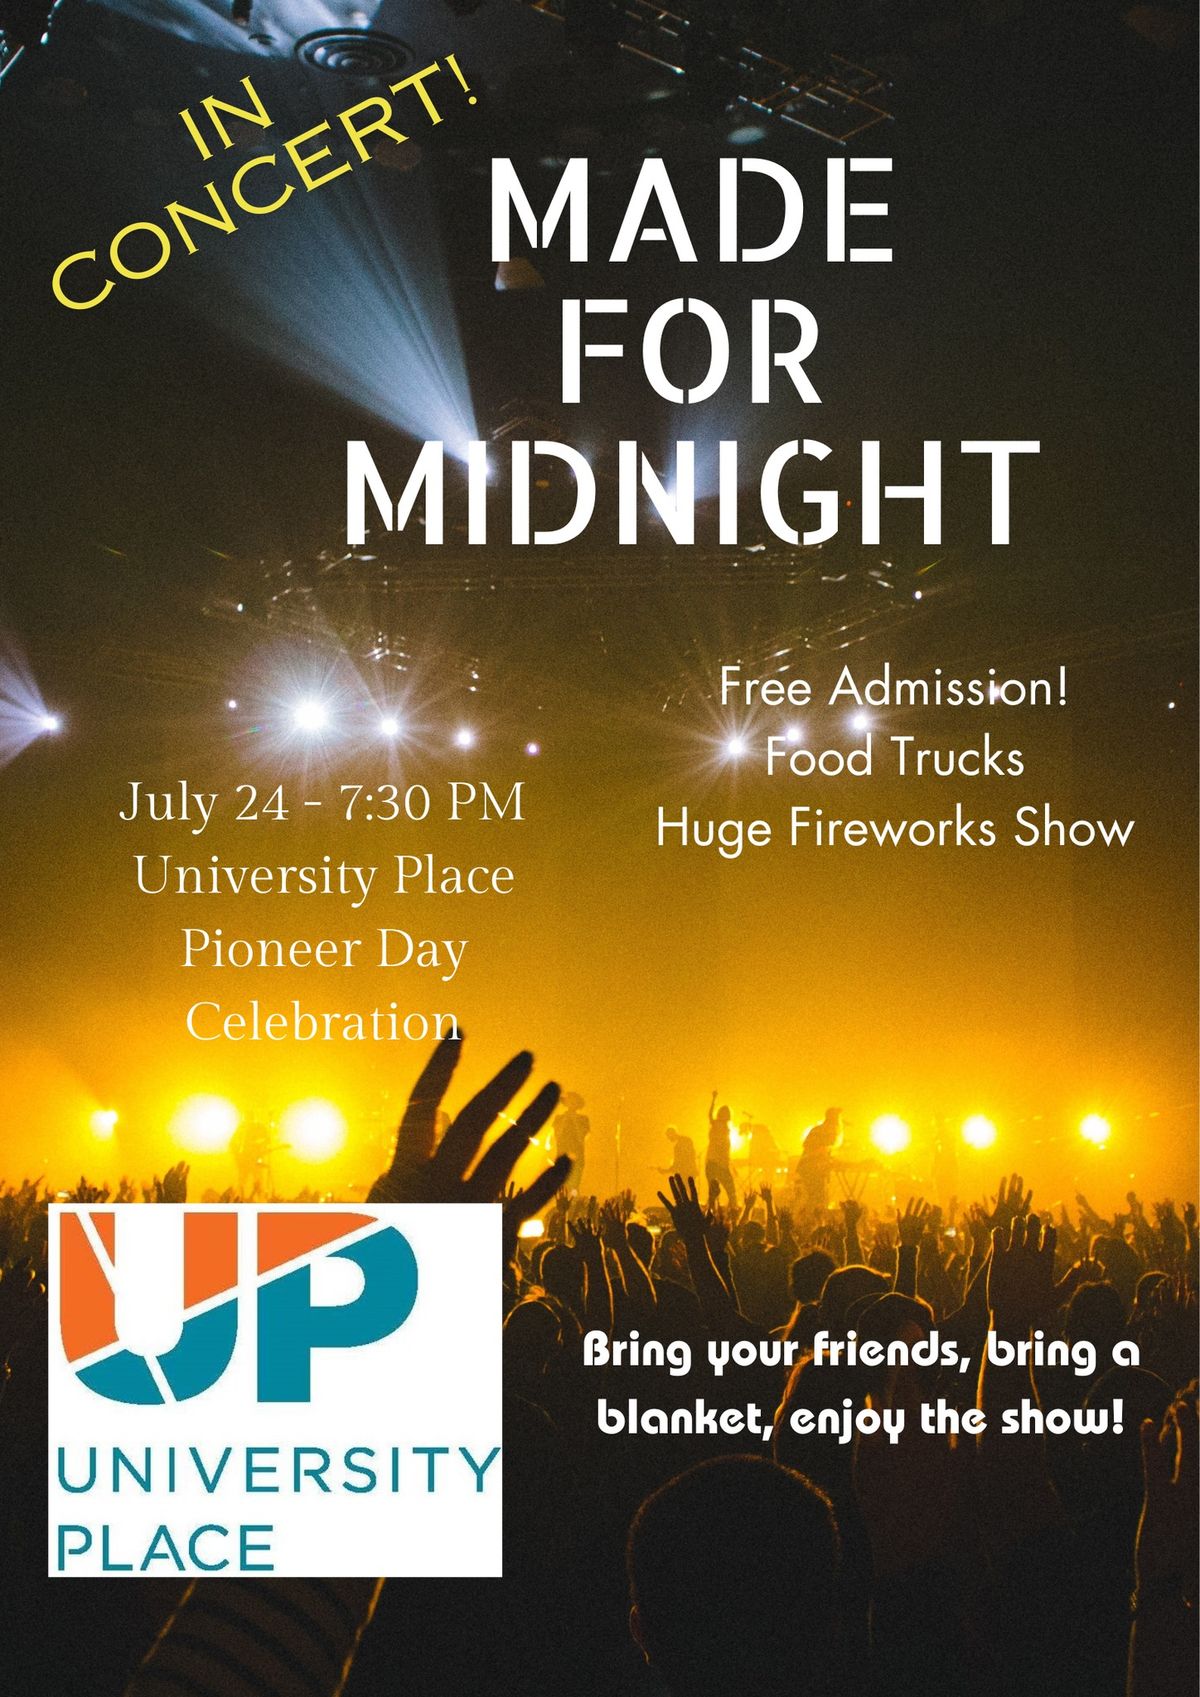 University Place Mall Pioneer Day Concert\/Fireworks Show